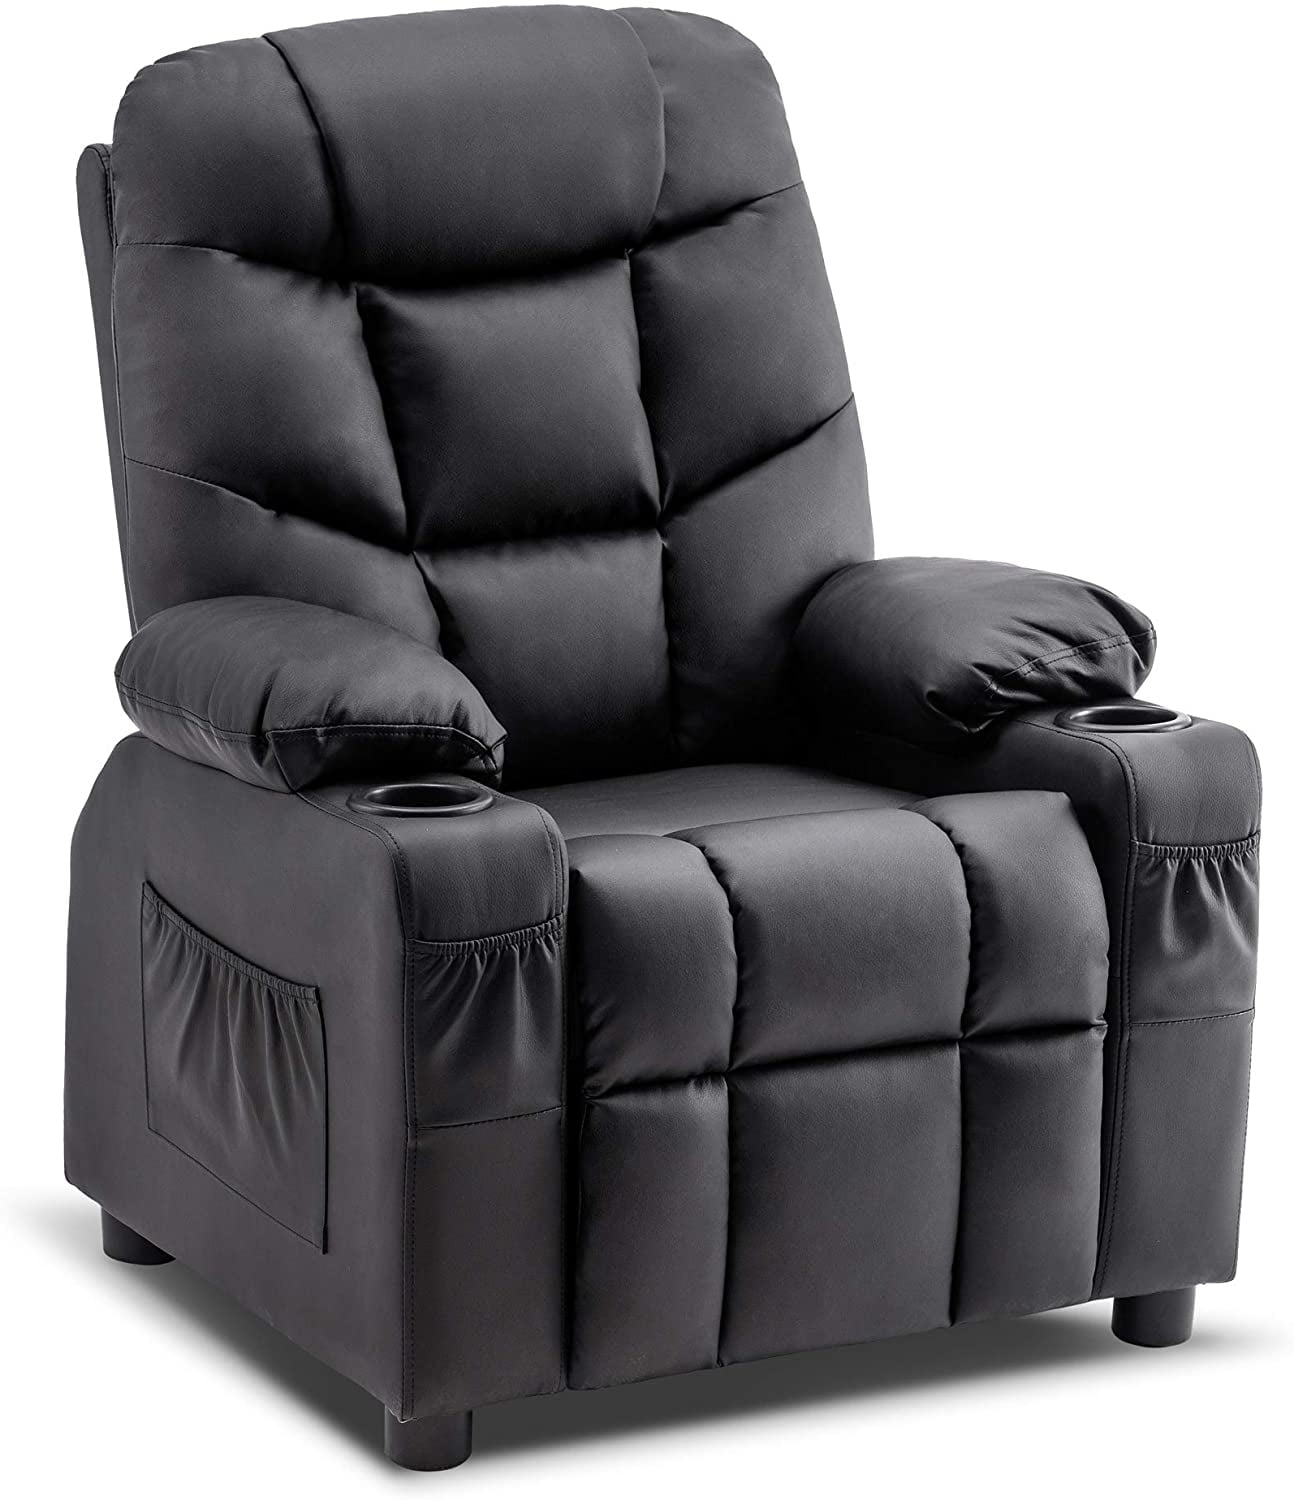 Mcombo Big Kids Recliner Chair With Cup Holders For Boys And Girls Room 2 Side Pockets 3 Age Group Faux Leather 7366 Walmart Com Walmart Com